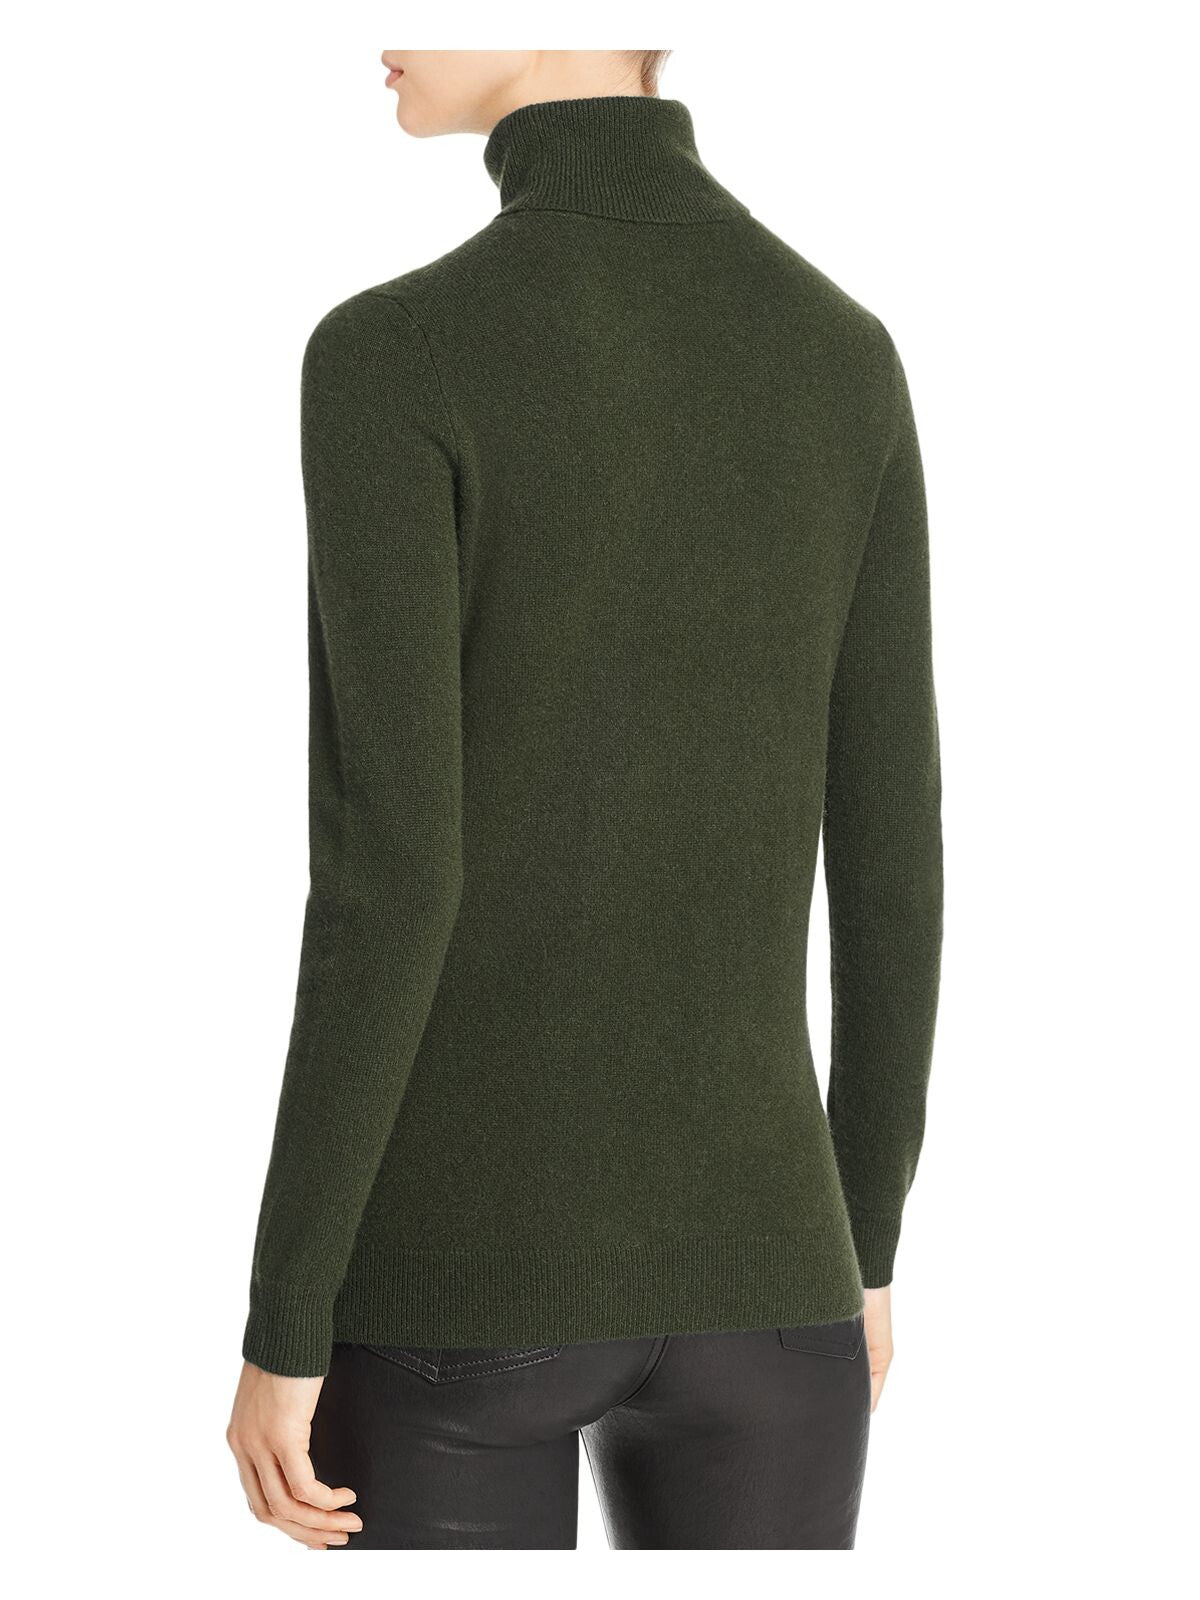 Designer Brand Womens Green Ribbed Long Sleeve Turtle Neck Sweater S